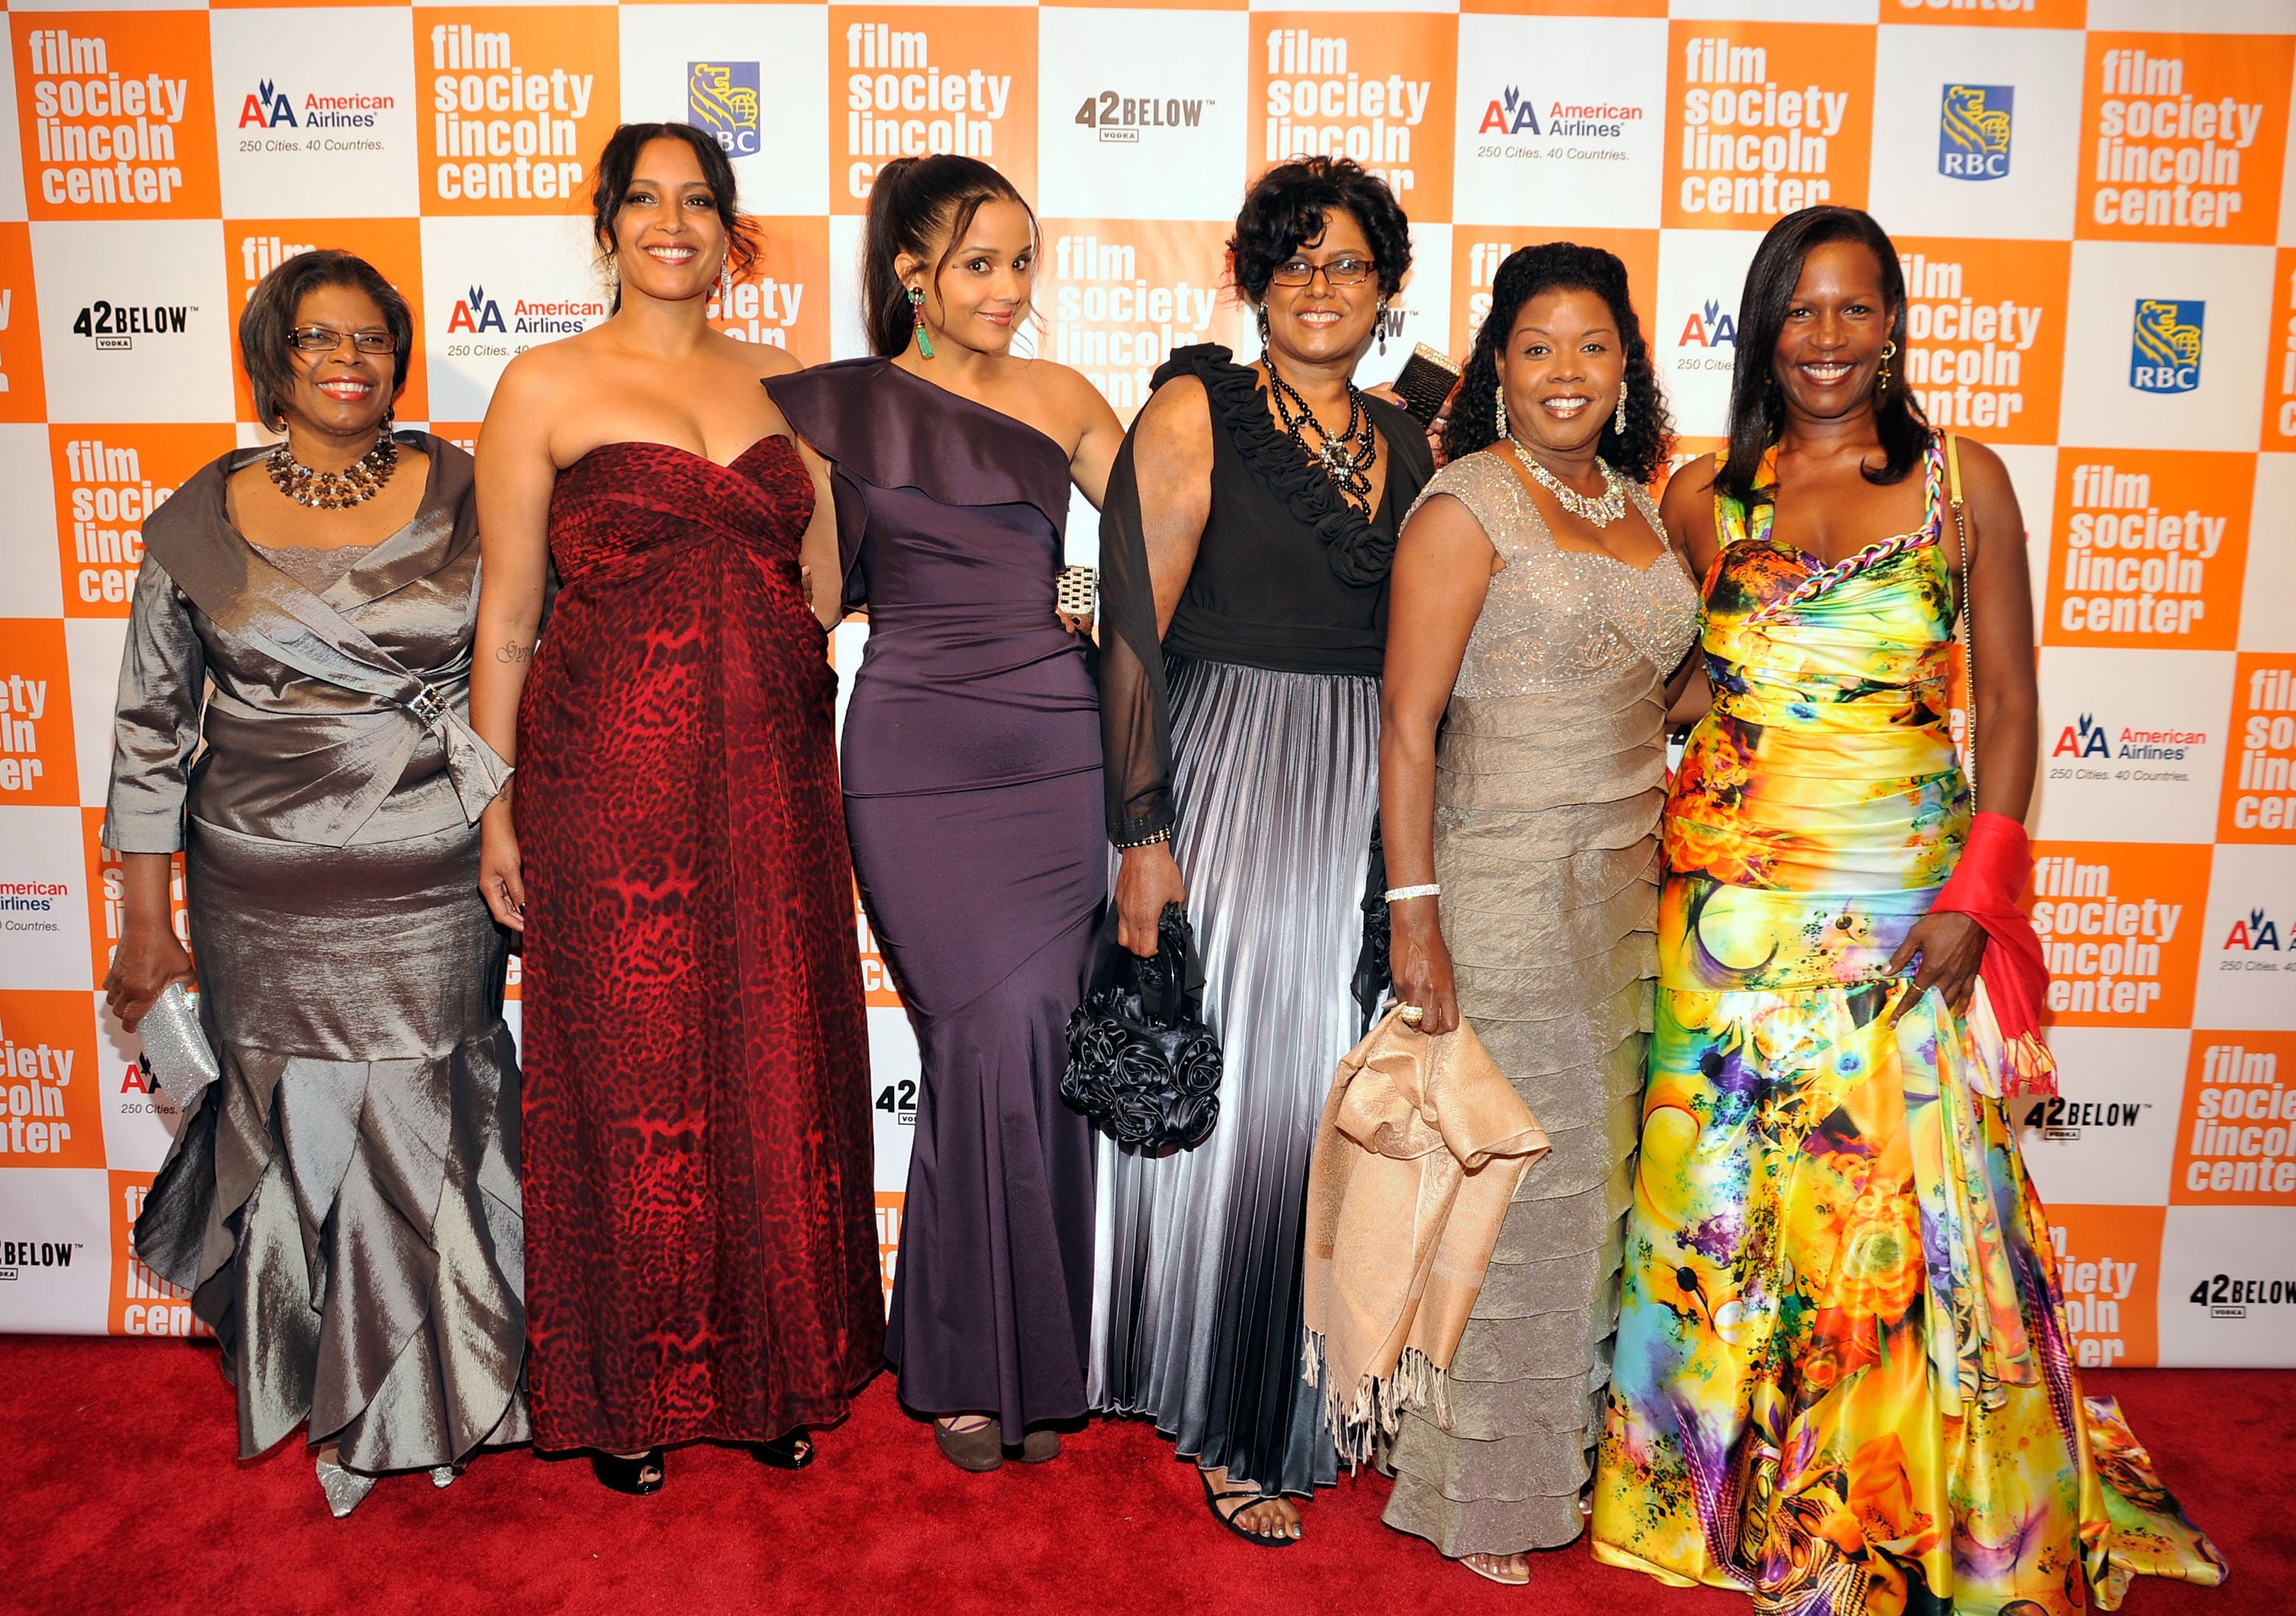 (L-R) Beverly Poitier-Henderson, Anika Poitier, Sydney Tamiia Poitier, Gina Poitier, Sherri Poitier and Pamela Poitier pose at The Film Society of Lincoln Center's presentation of the 38th Annual Chaplin Award on May 2, 2011, in New York City | Source: Getty Images